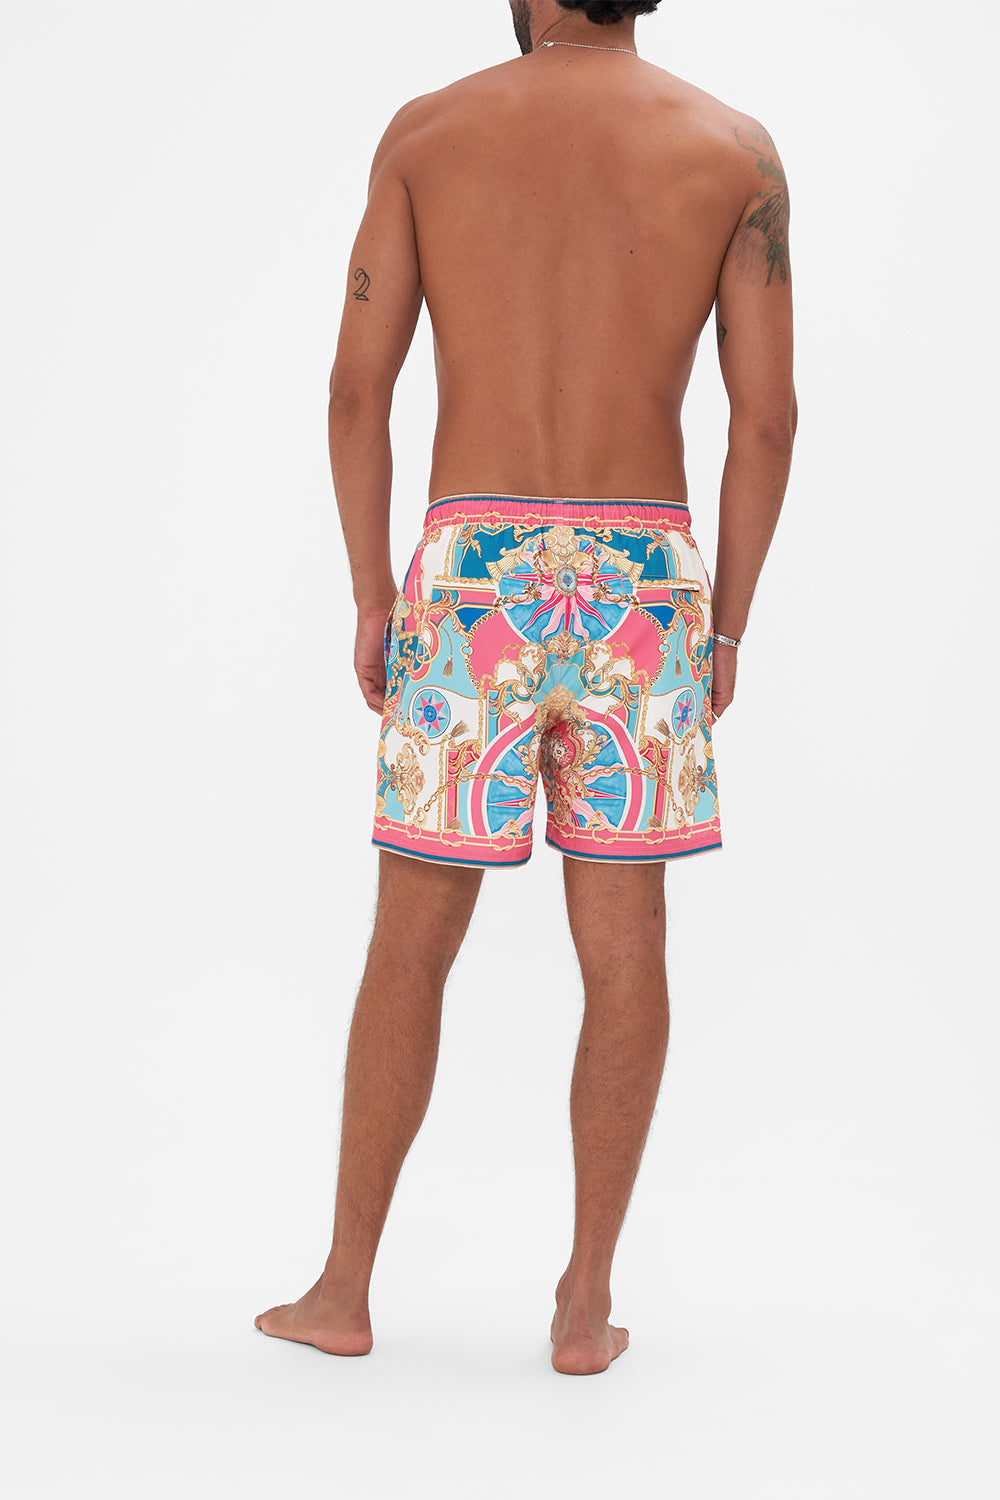 Mid Length Boardshort Sail Away With Me - Camilla